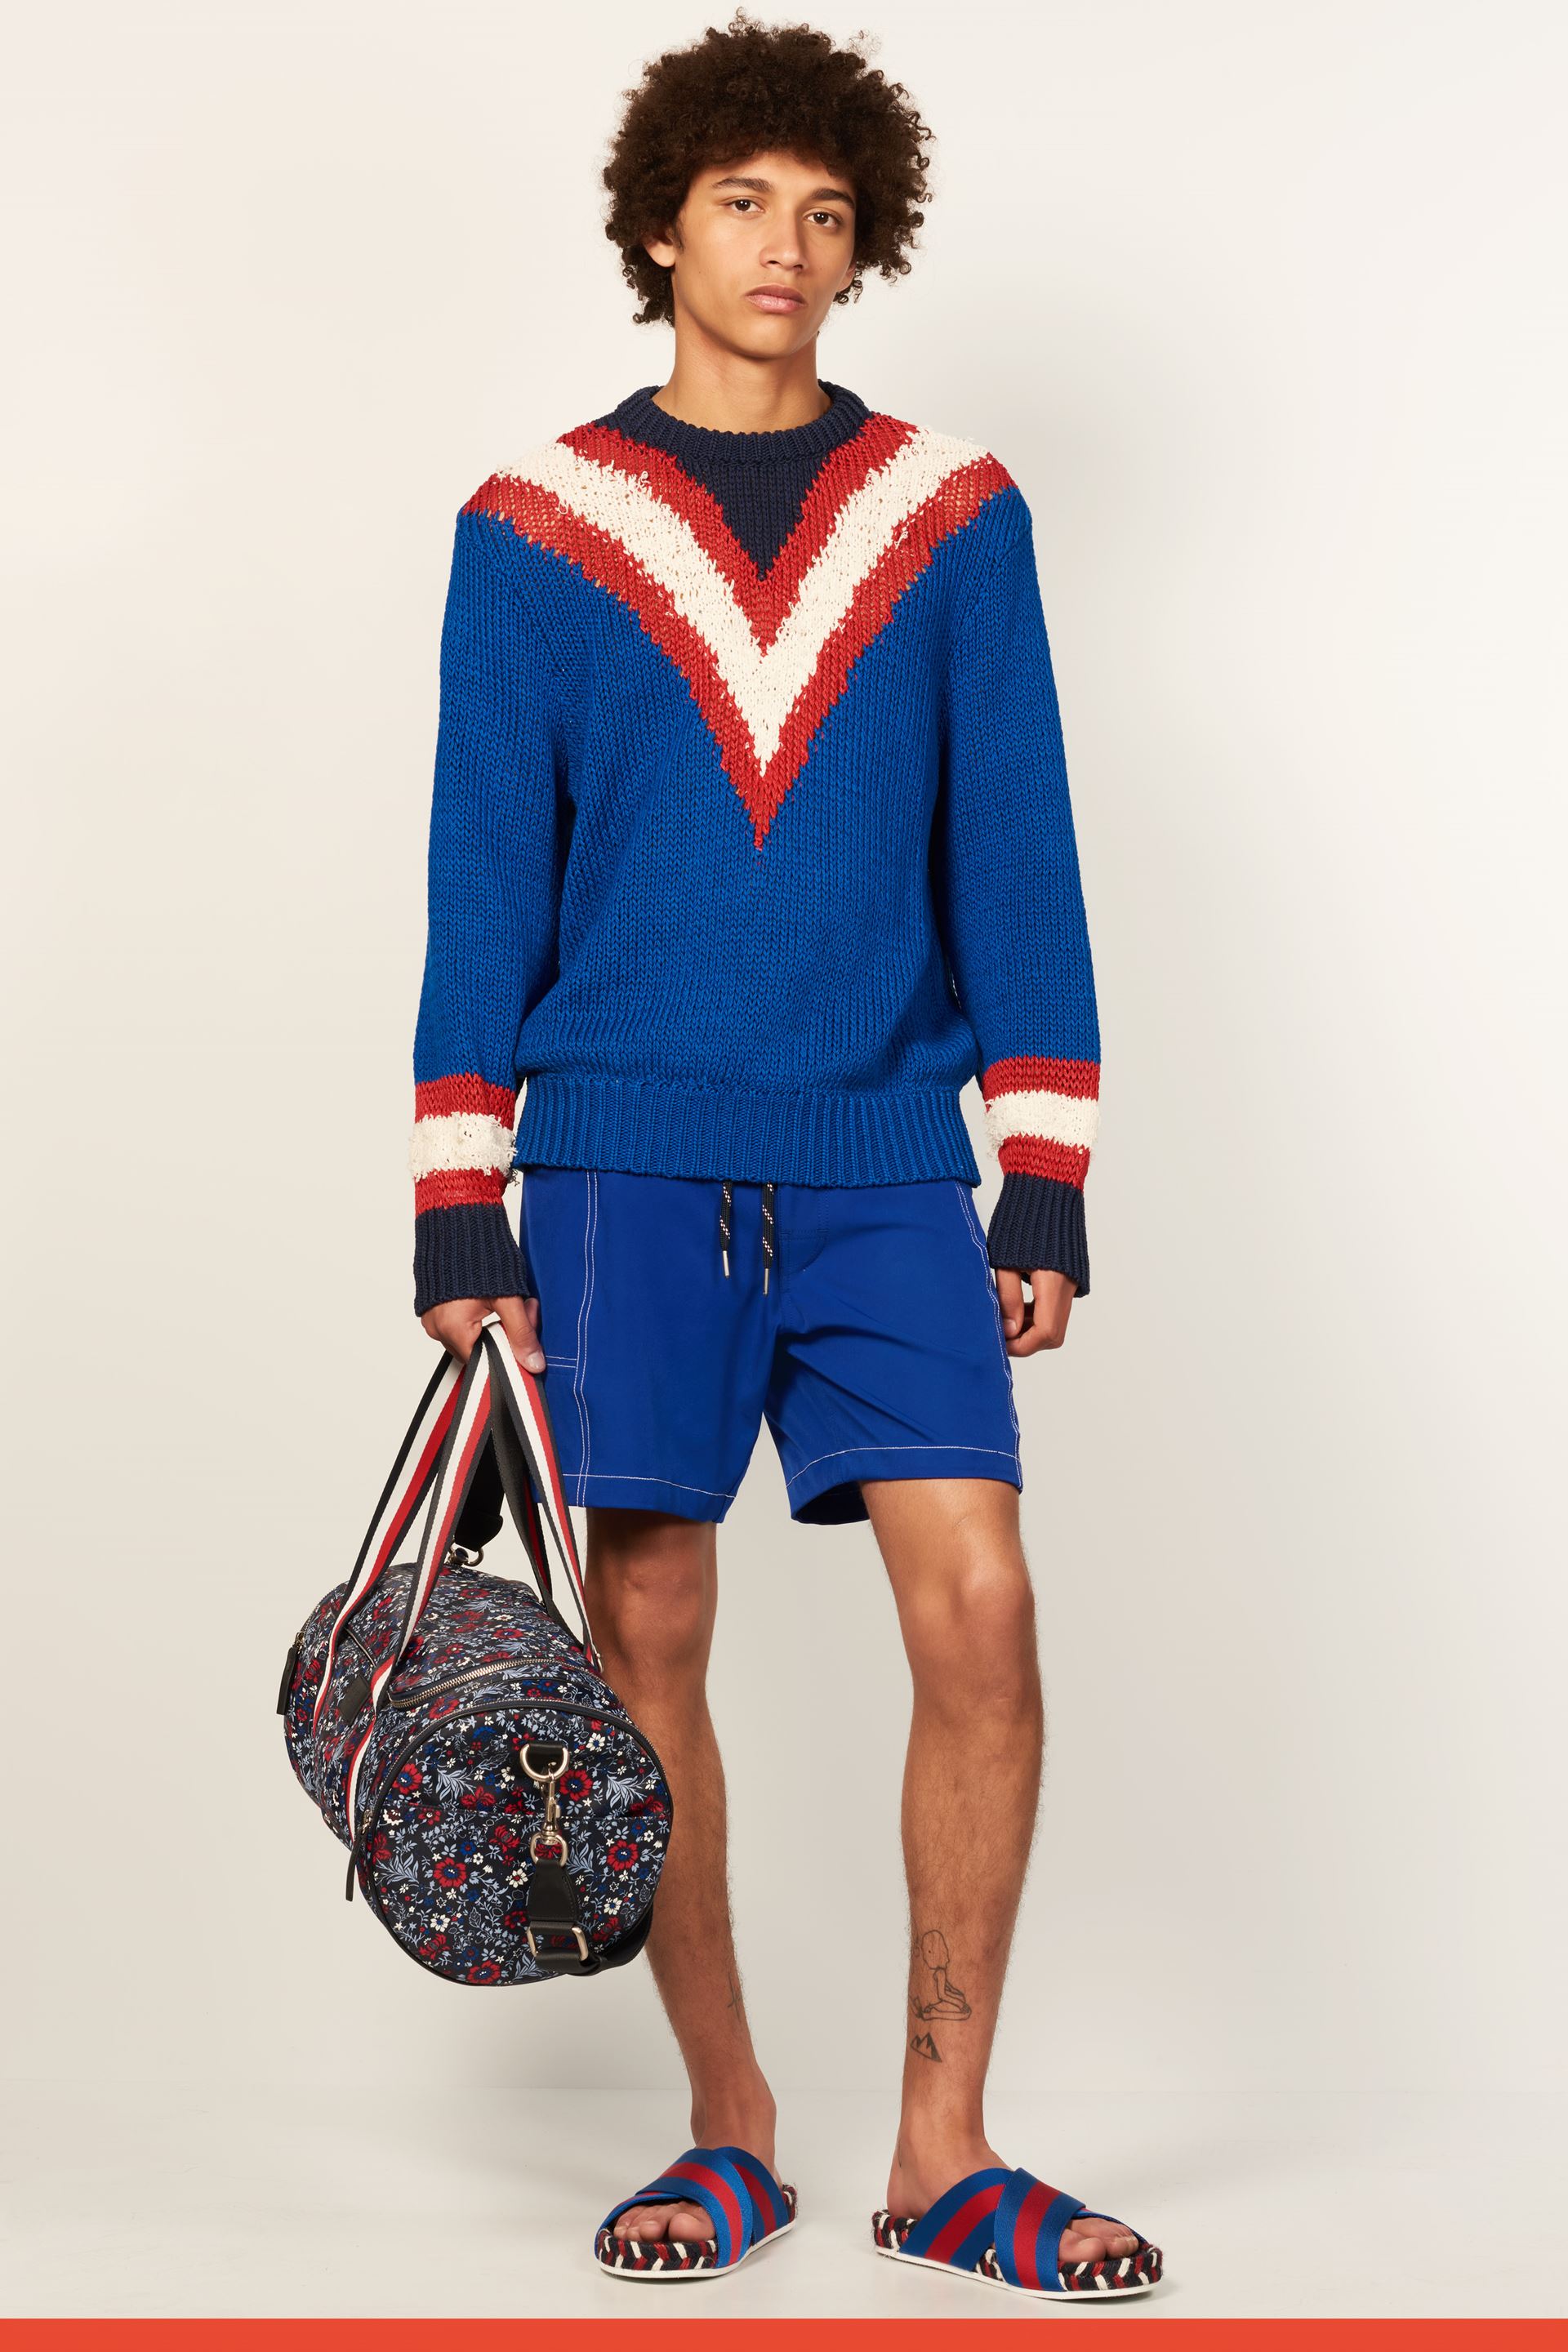 Tommy Hilfiger's Special Edition - Daily Front Row